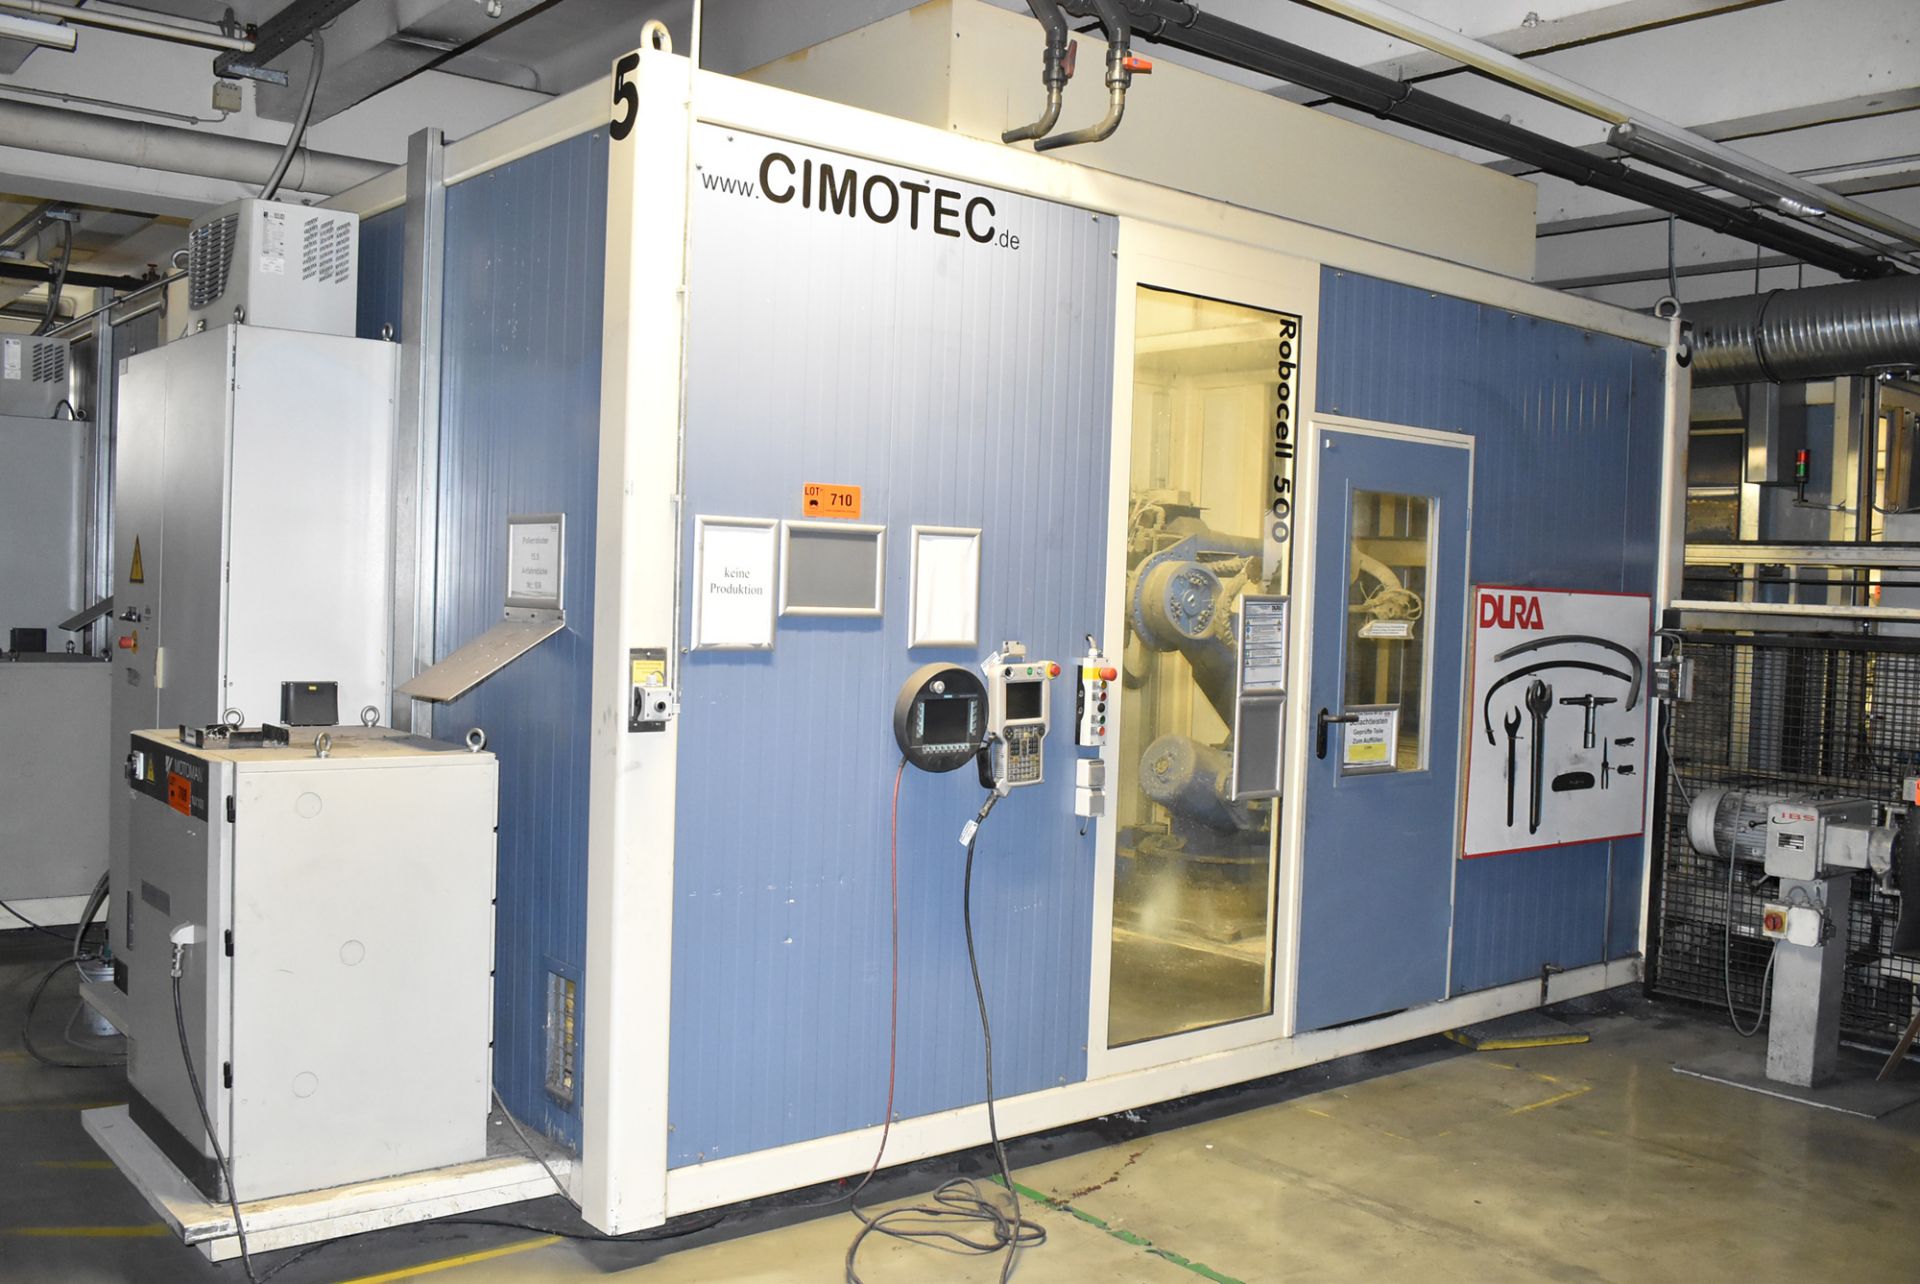 CIMOTEC (2009) ROBOCELL 500 SOUNDPROOF ENCLOSURE WITH SIEMENS SIMATIC MOBILE PANEL CONROL, - Image 5 of 8